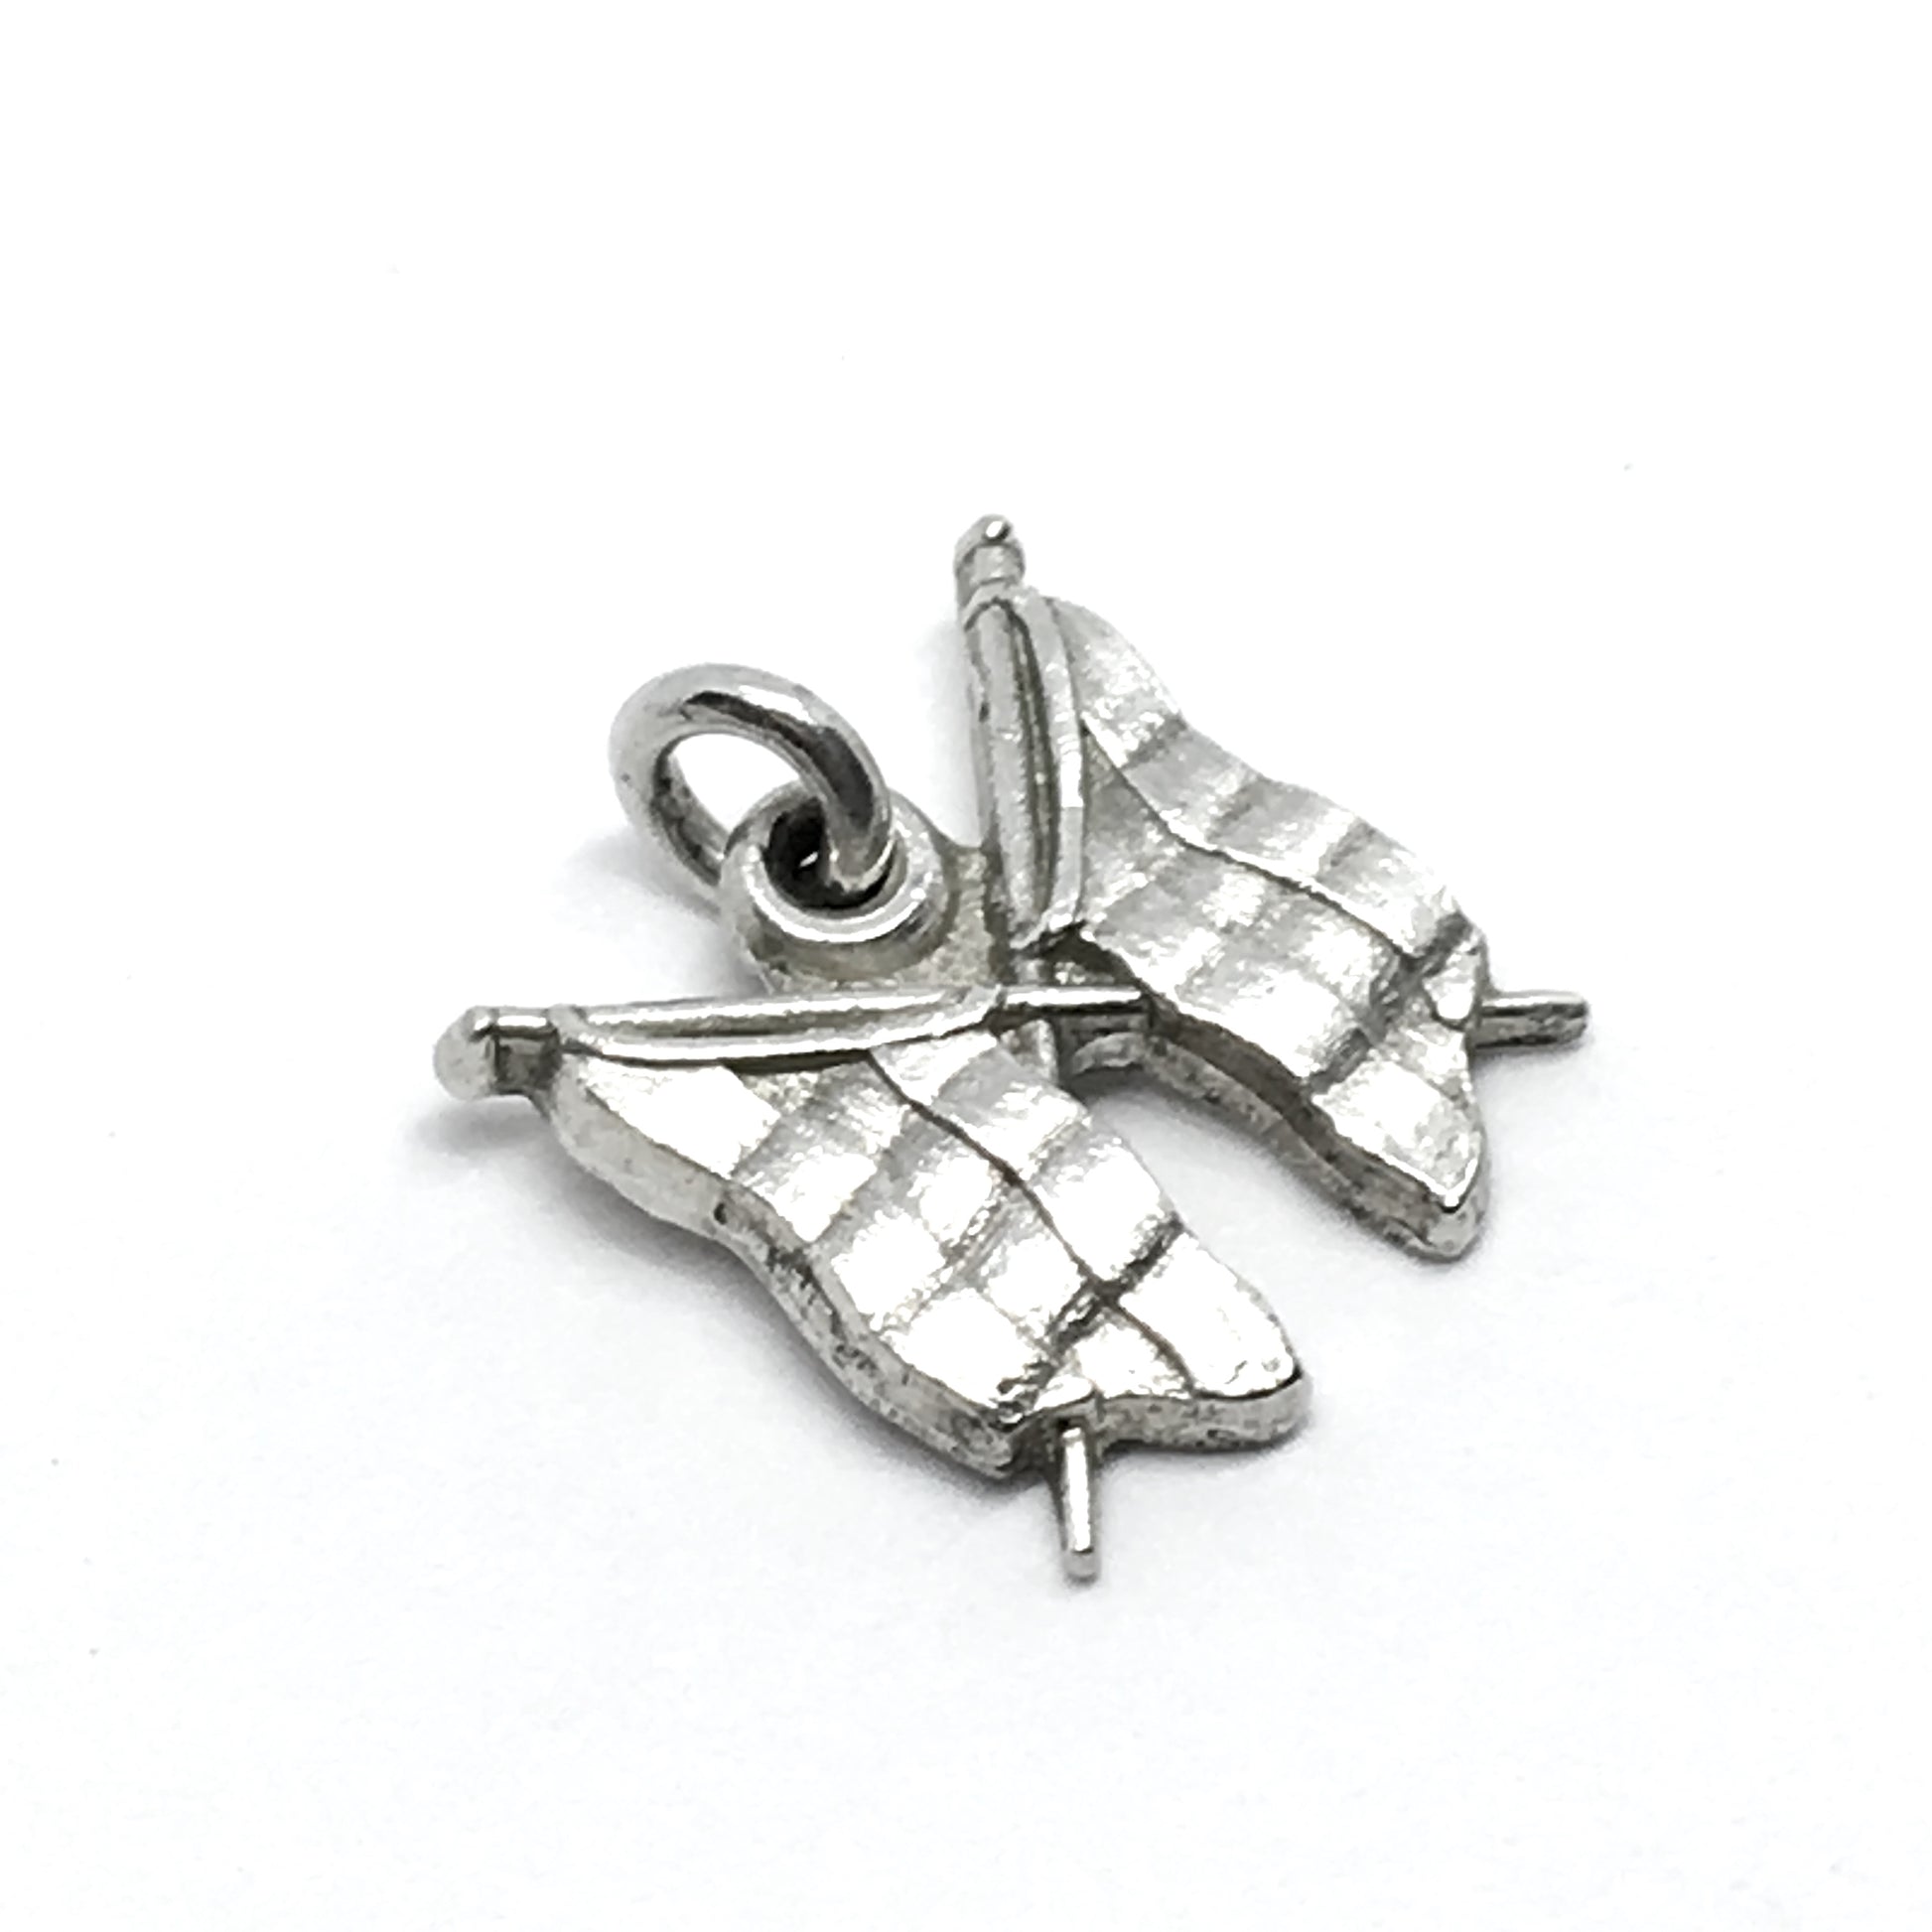 Vintage Jewelry | Vintage Sterling Silver 3 Band Triband Country Flag Charm Pendant